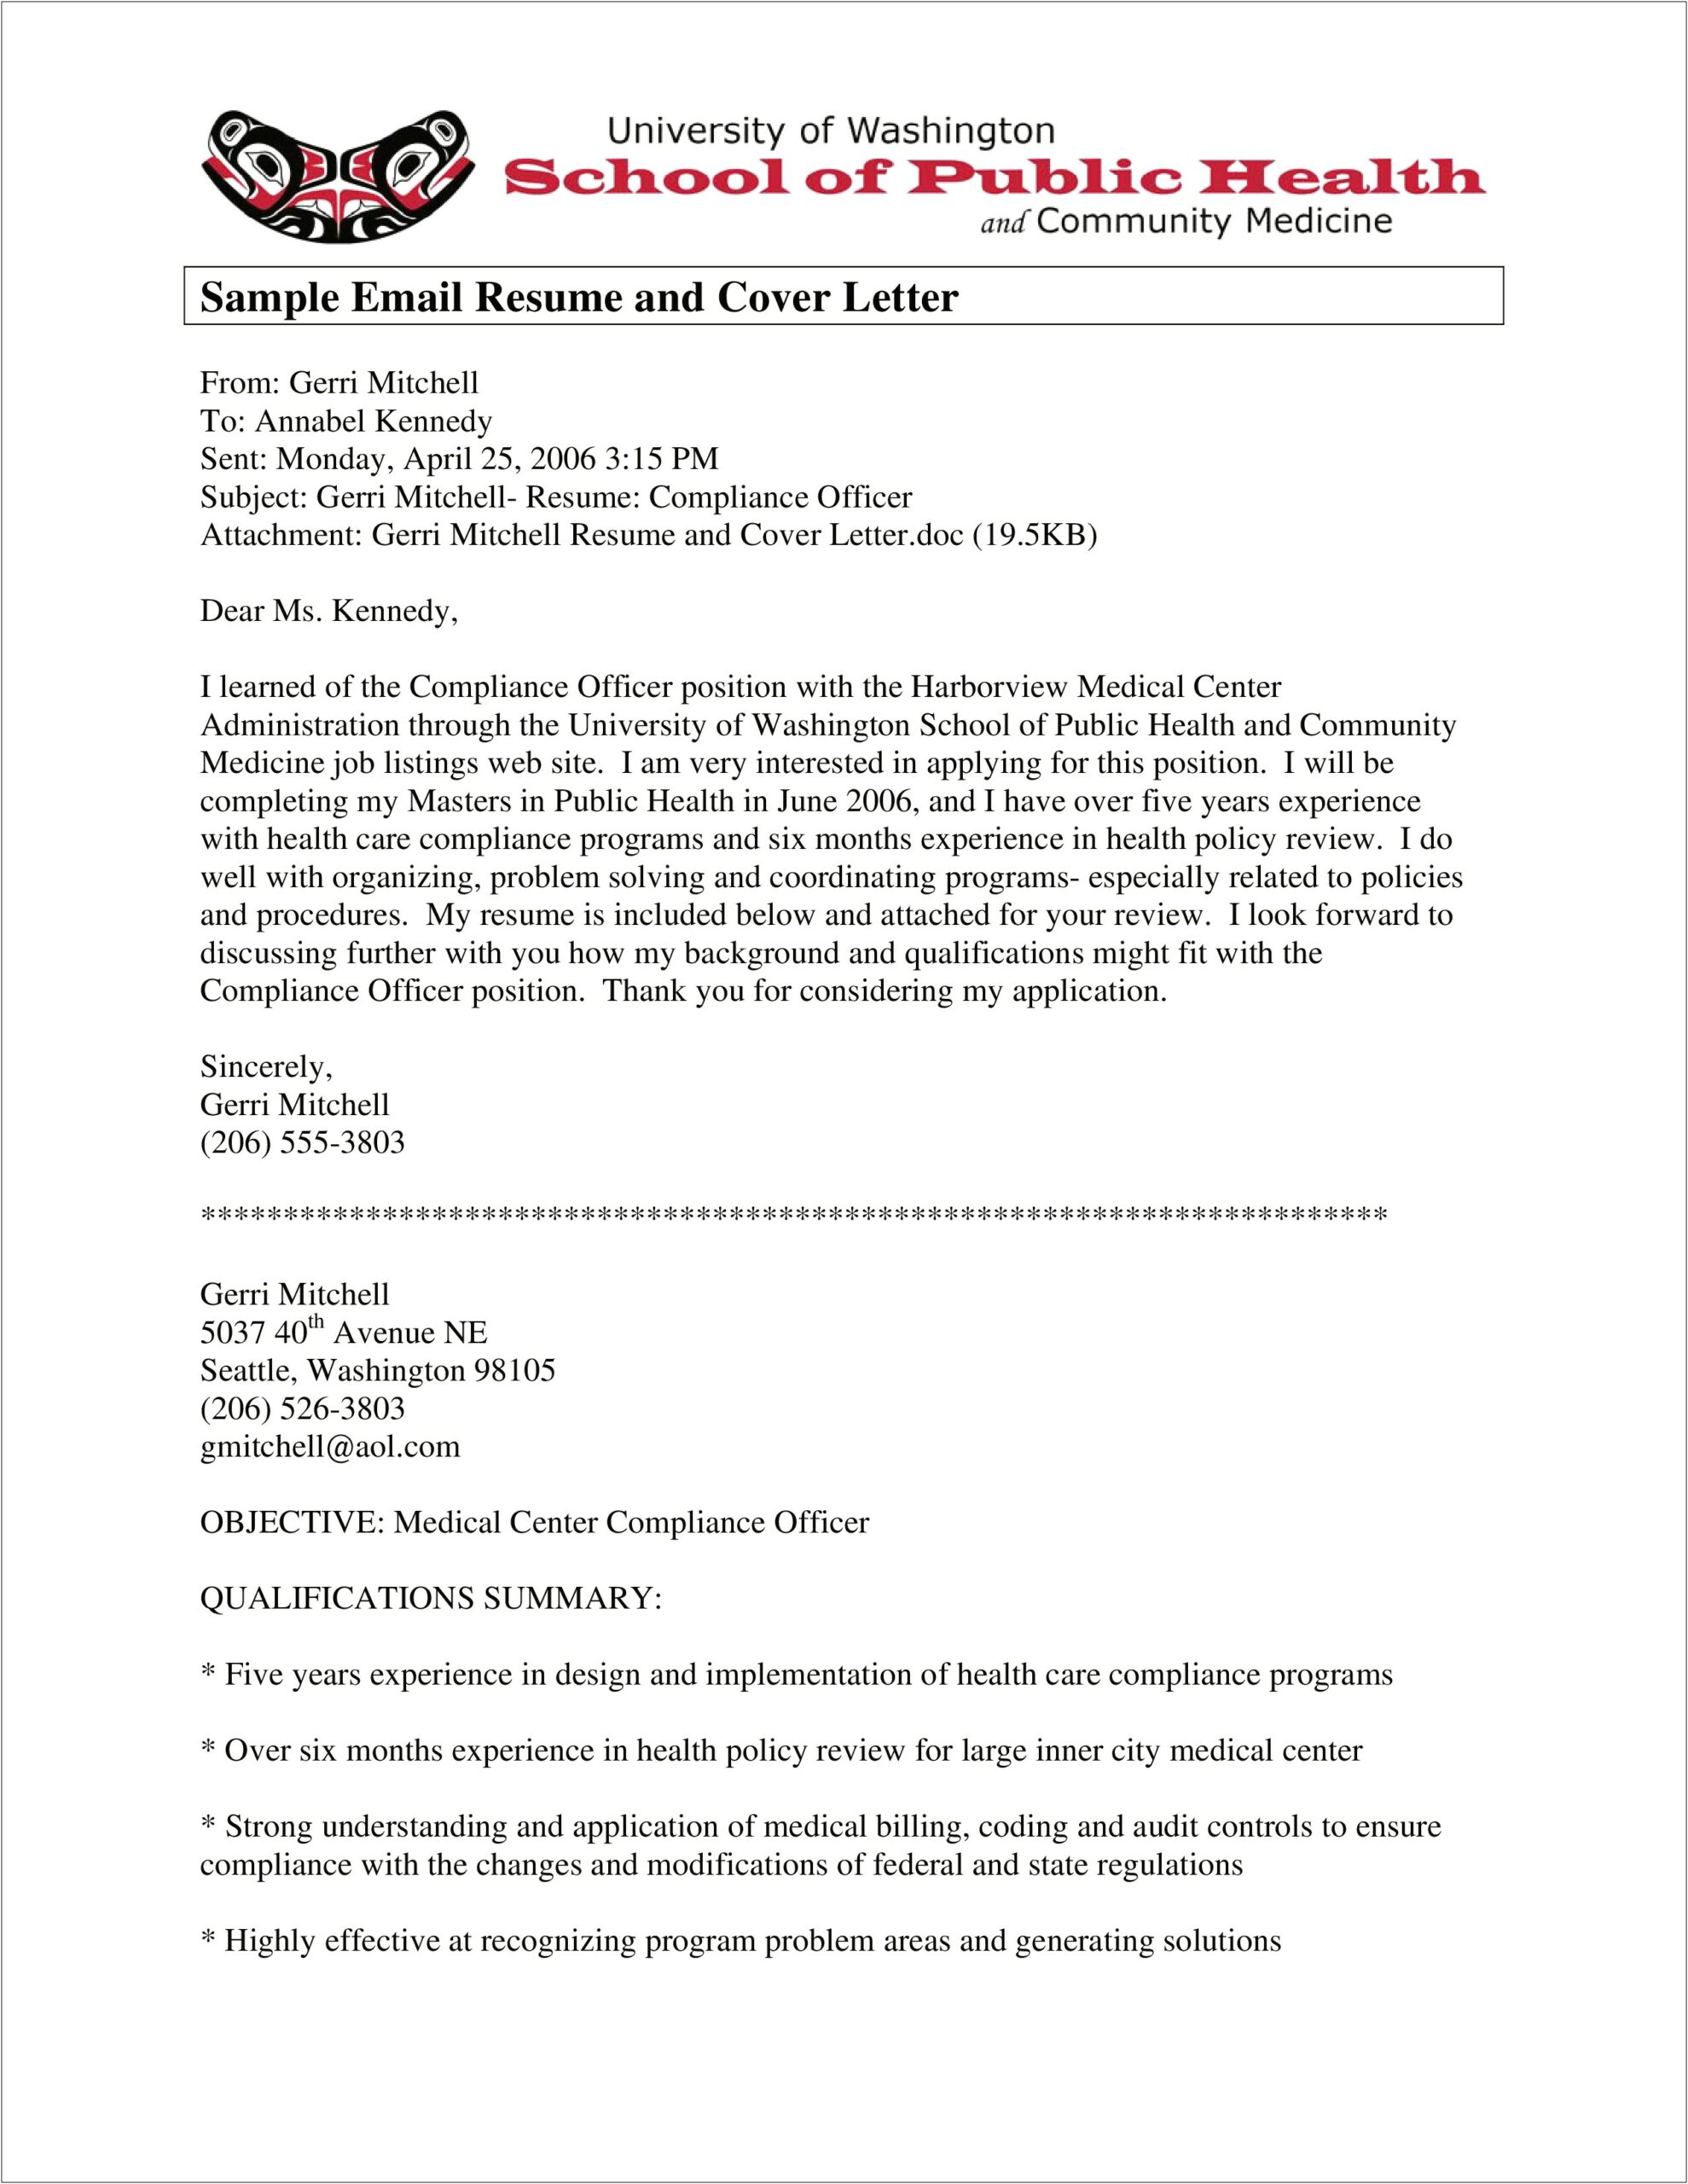 Email Including Cover Letter And Resume Subject